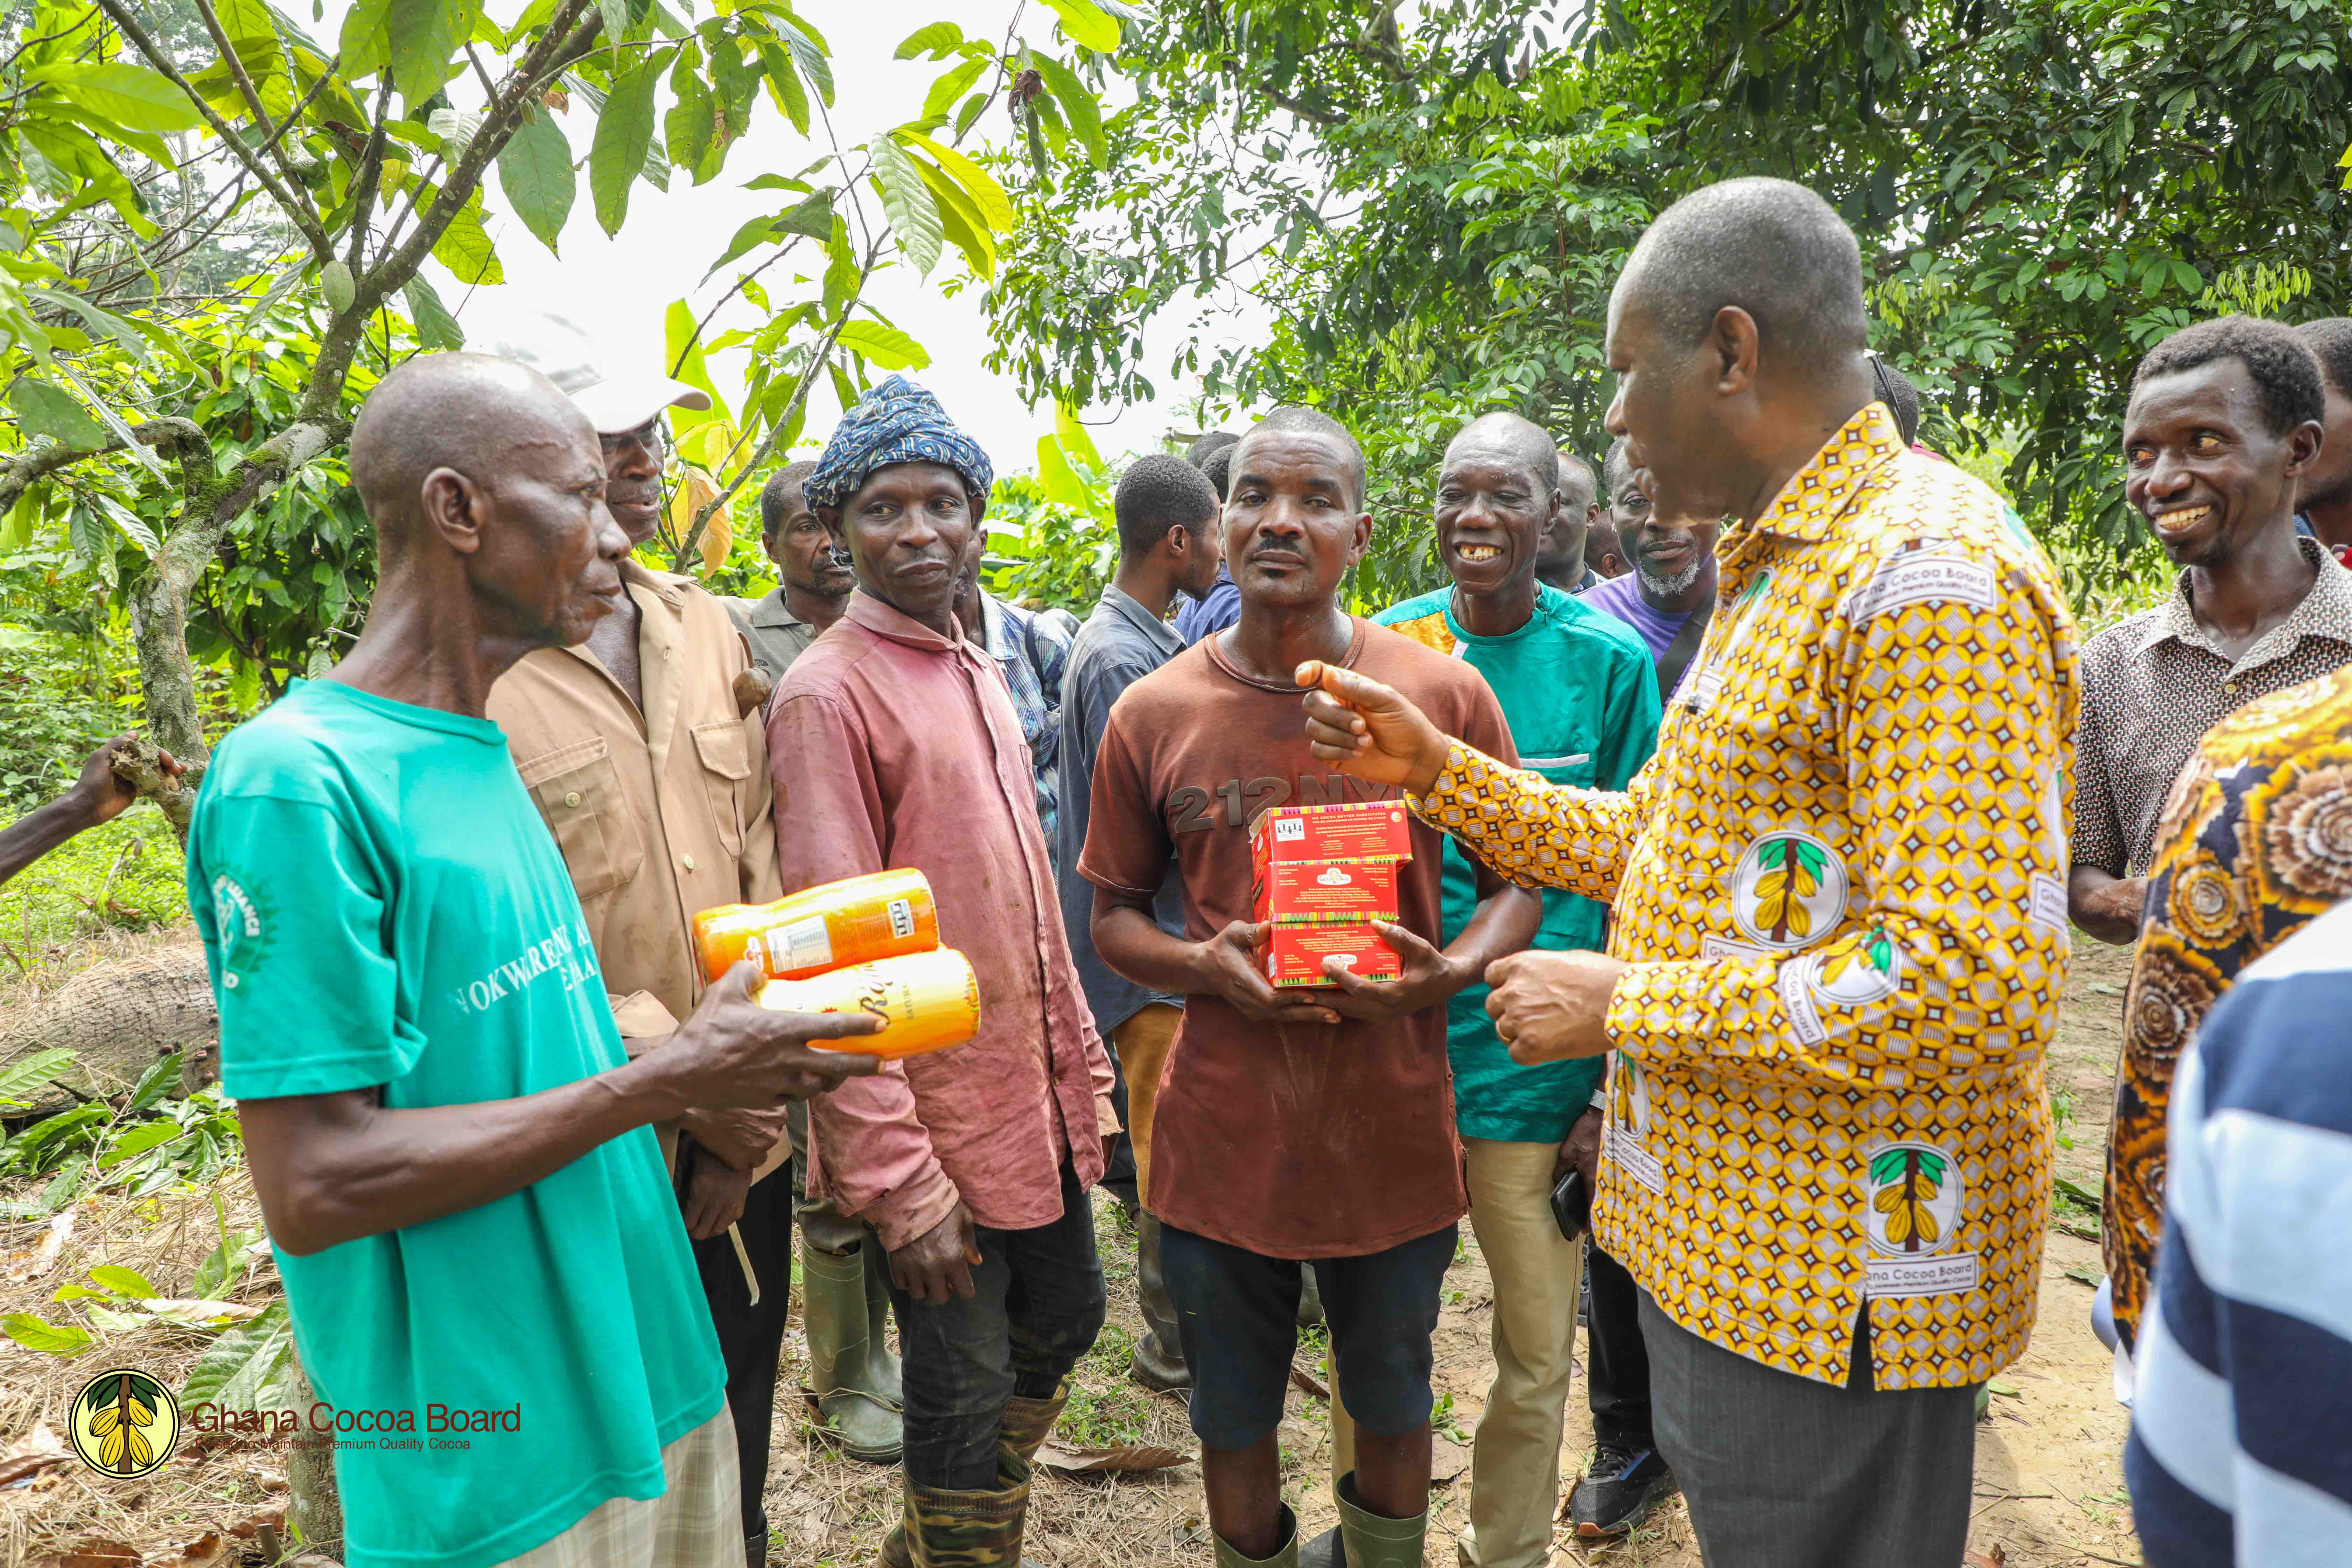 CHIEF EXECUTIVE'S FIELD TOUR OF CENTRAL AND WESTERN SOUTH COCOA REGIONS